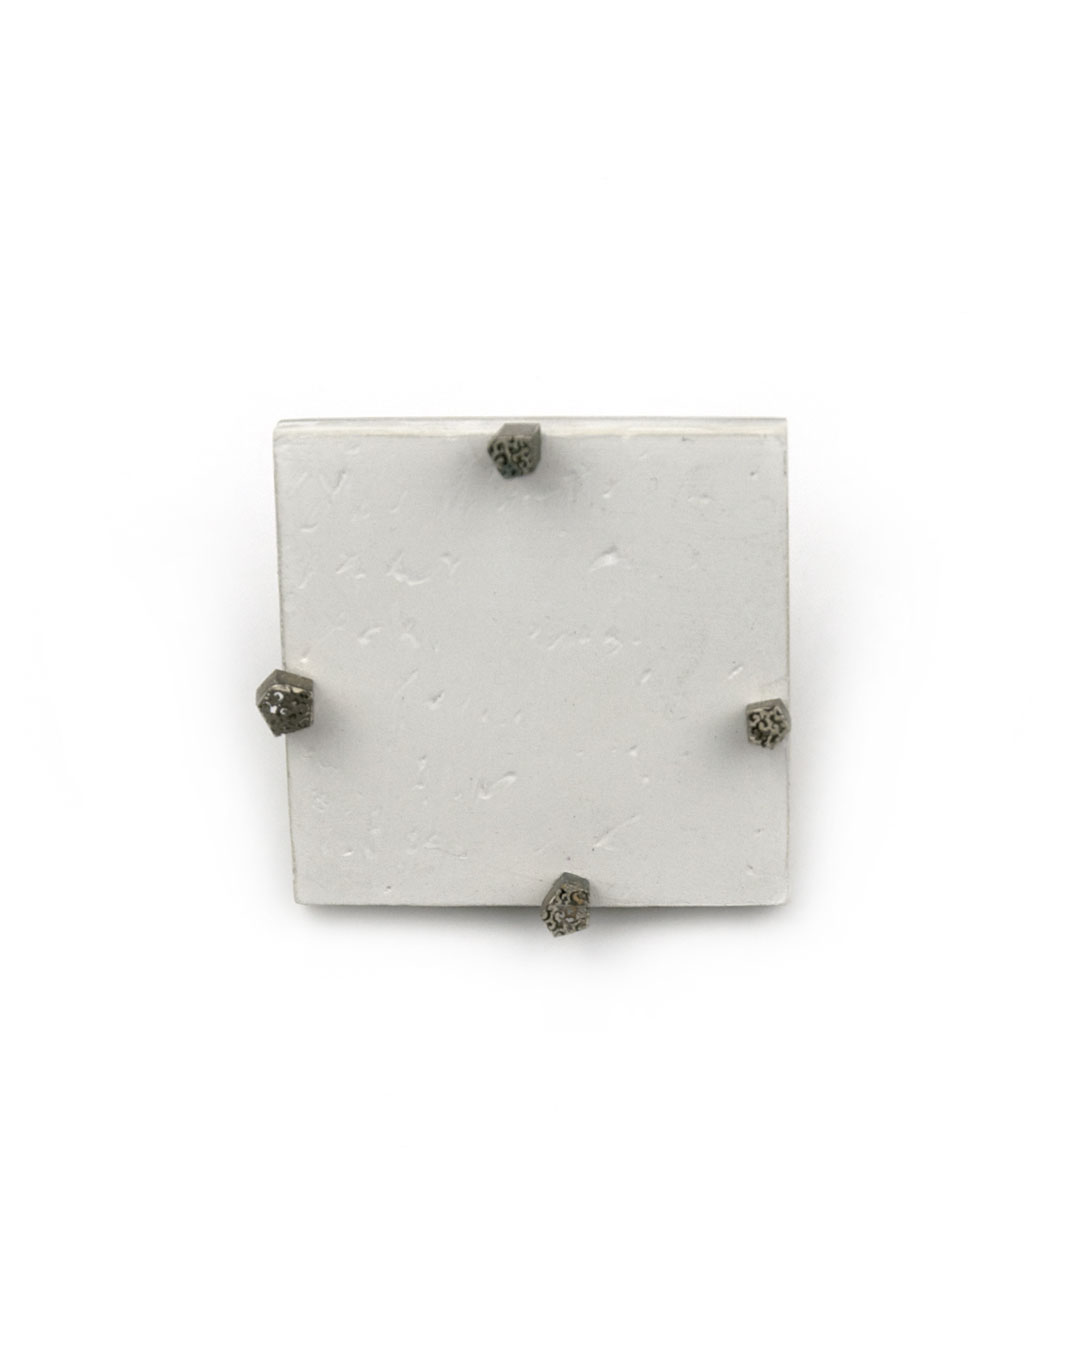 Piret Hirv, Letters of Flora 2, 1999, brooch; silver, plaster, paint, 48 x 49 x 15 mm, €435